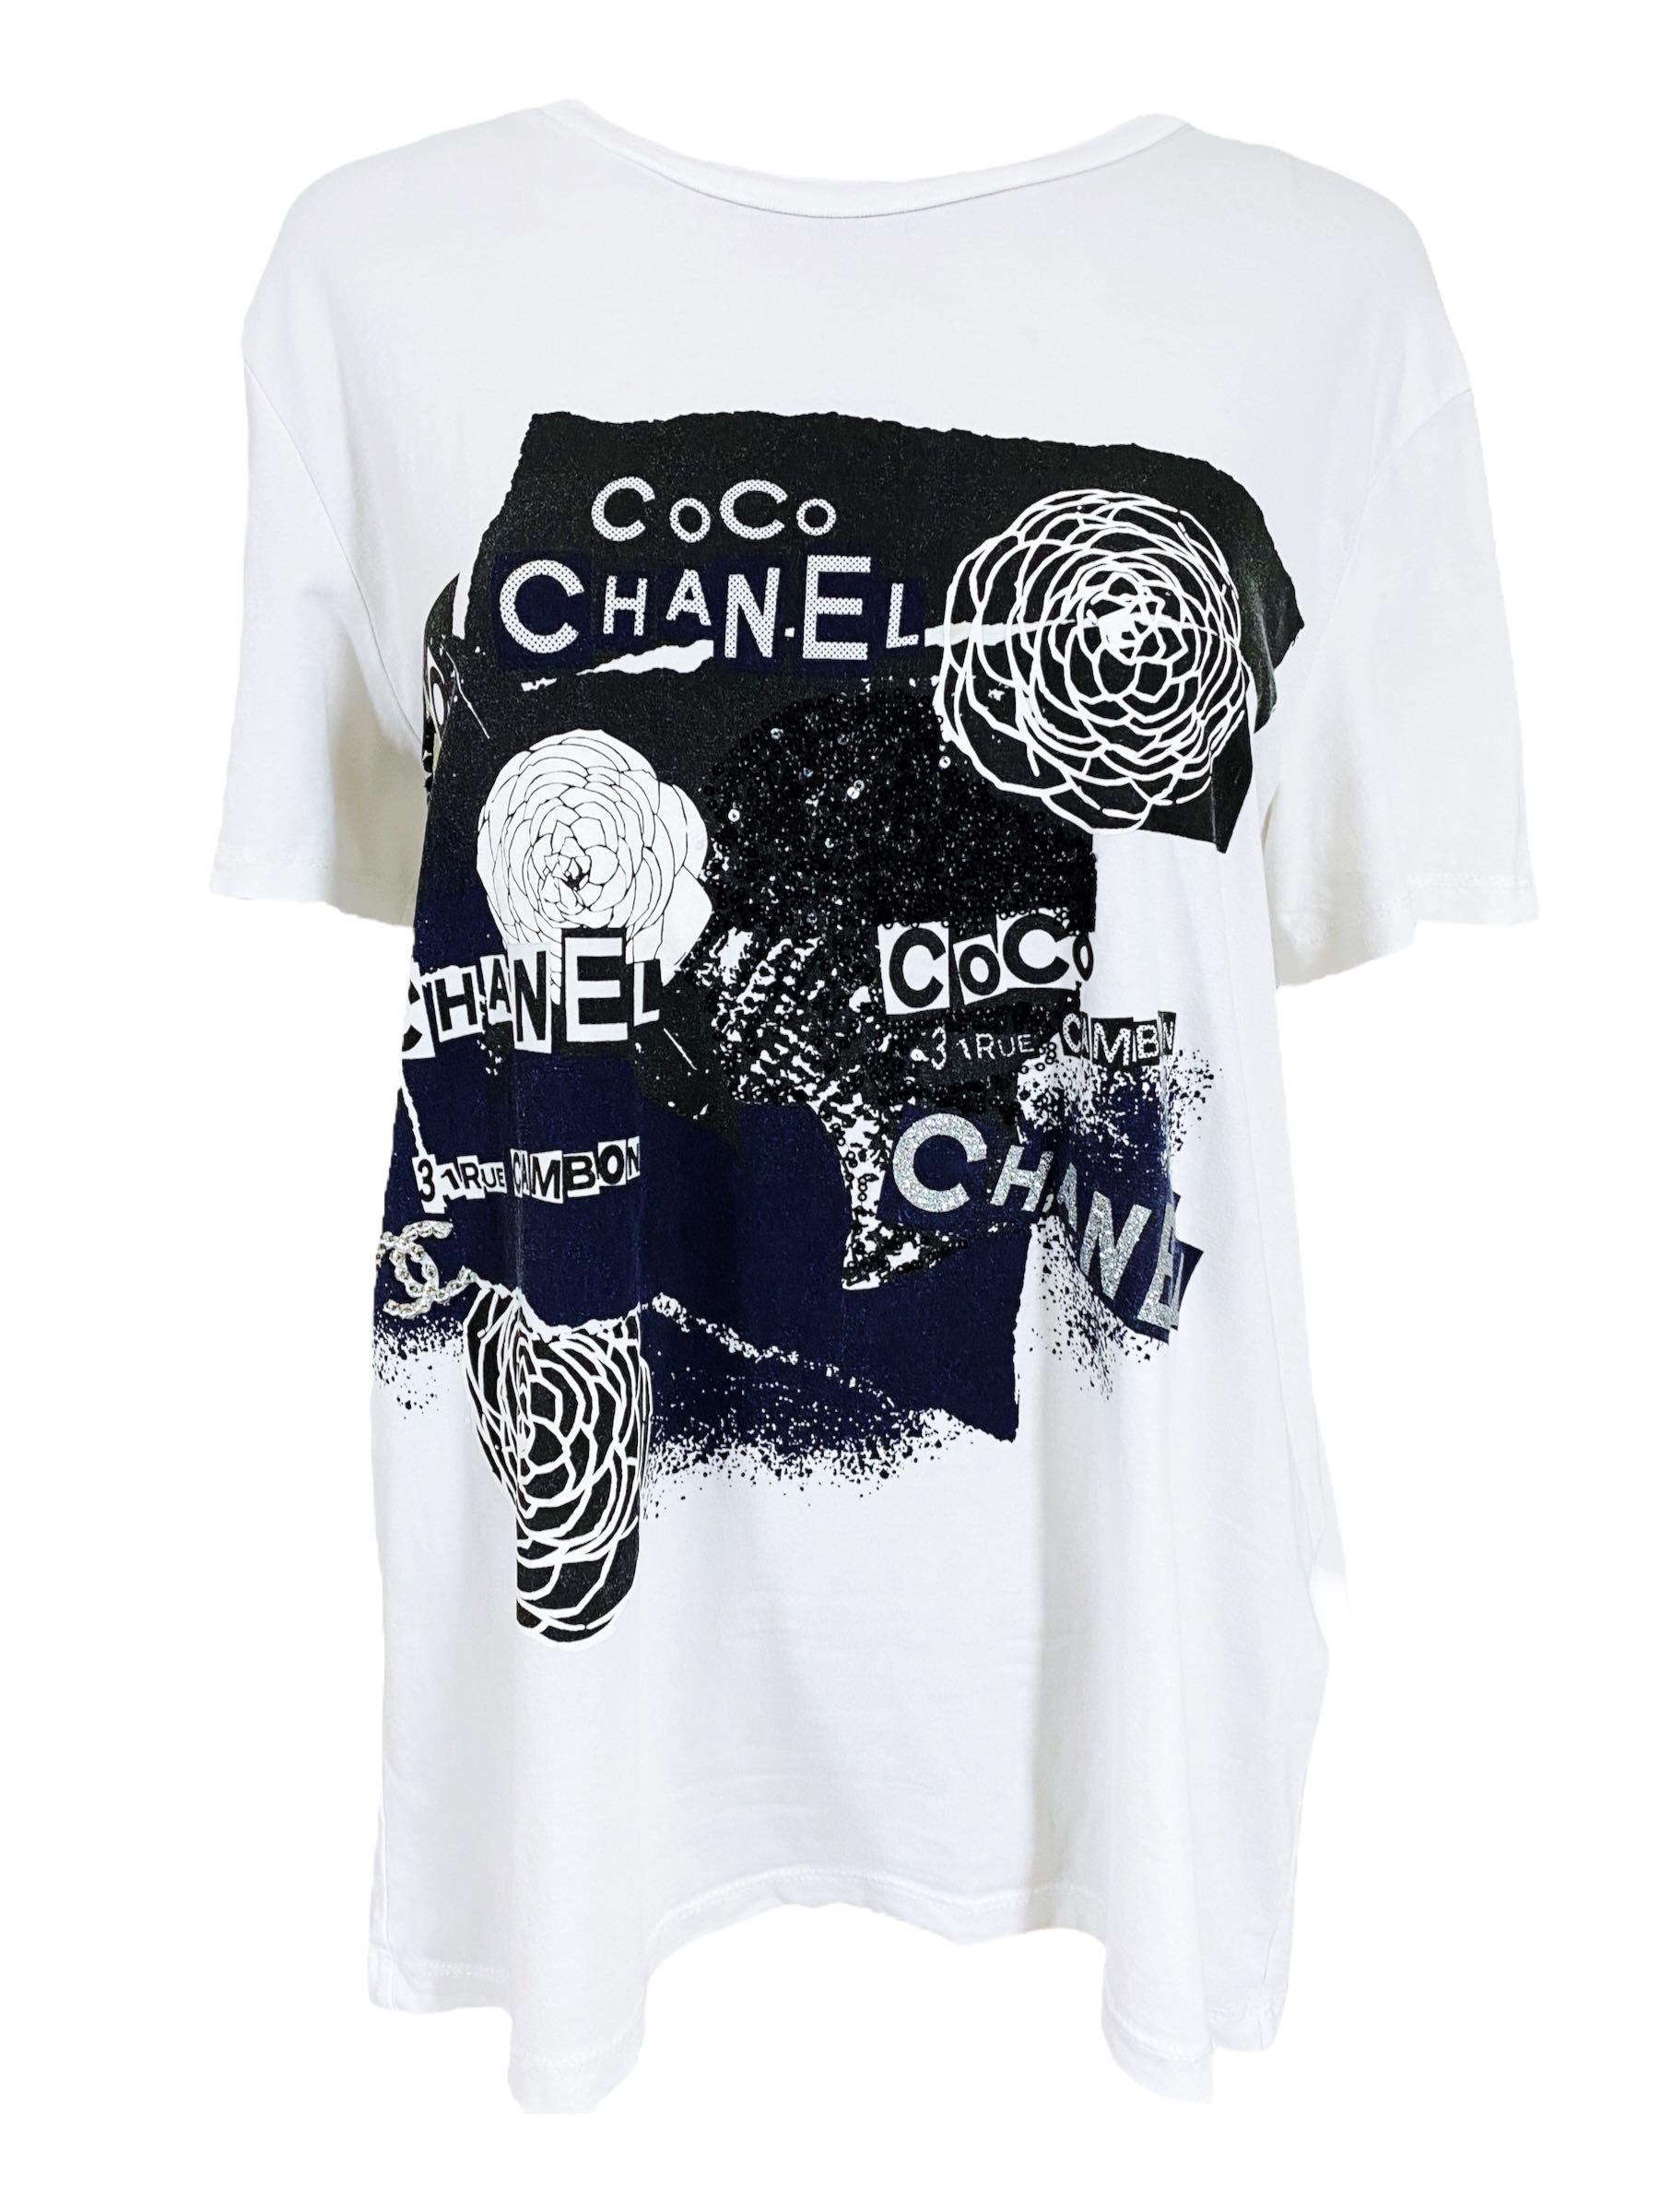 ATIQ COCO CHaNEL TShirt for Women Black  Size M  Buy Online at Best  Price in KSA  Souq is now Amazonsa Fashion